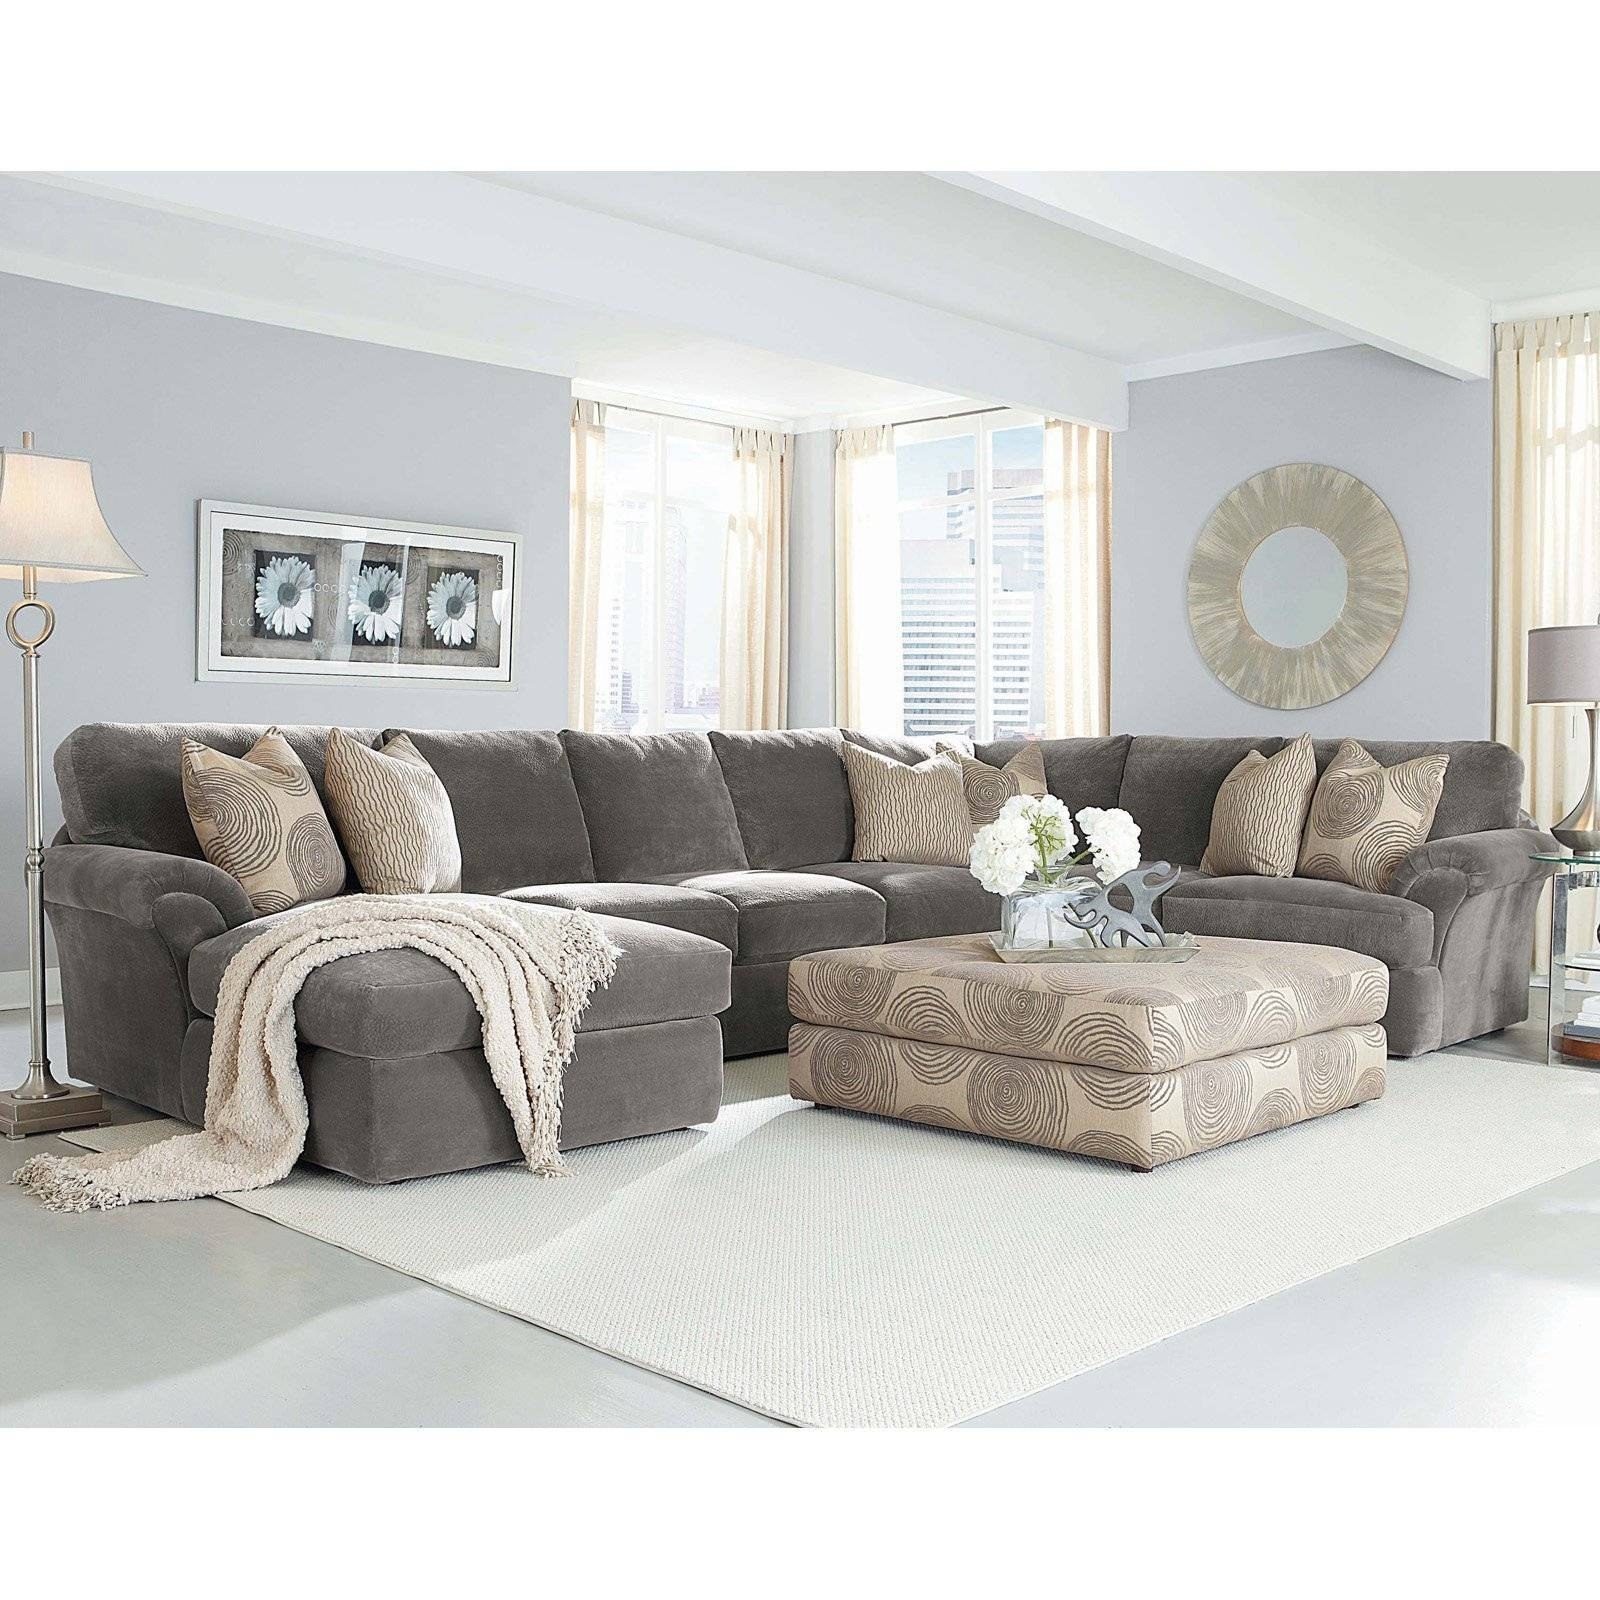 Grey Sectional Couch Ideas On Foter